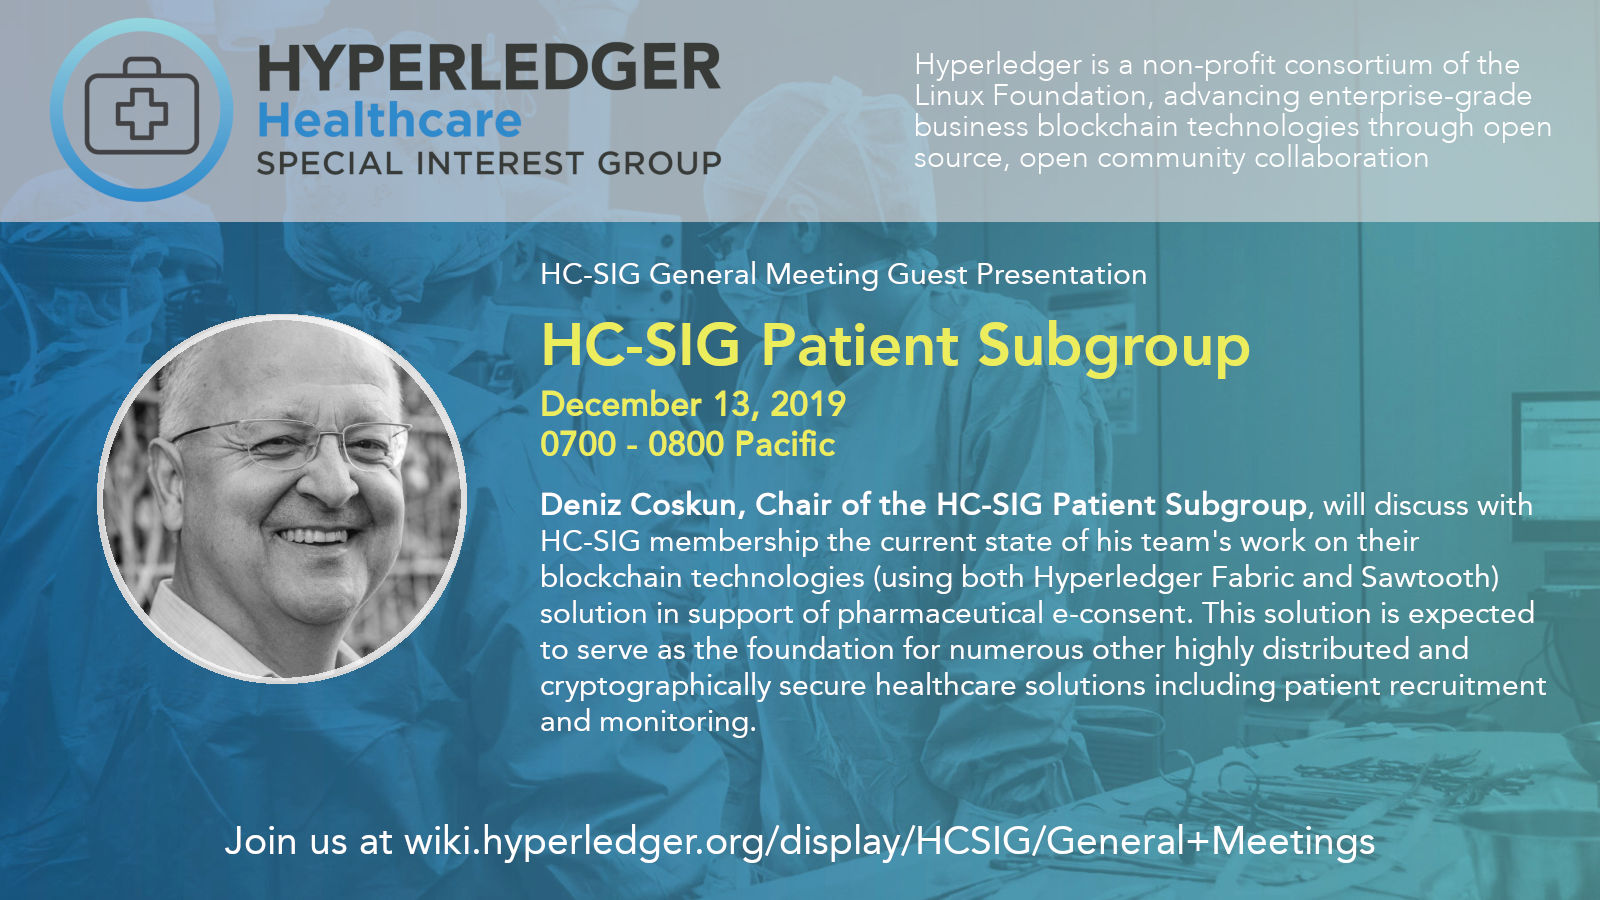 A Pharmaceutical eConsent Project Using both Hyperledger Sawtooth and Fabric